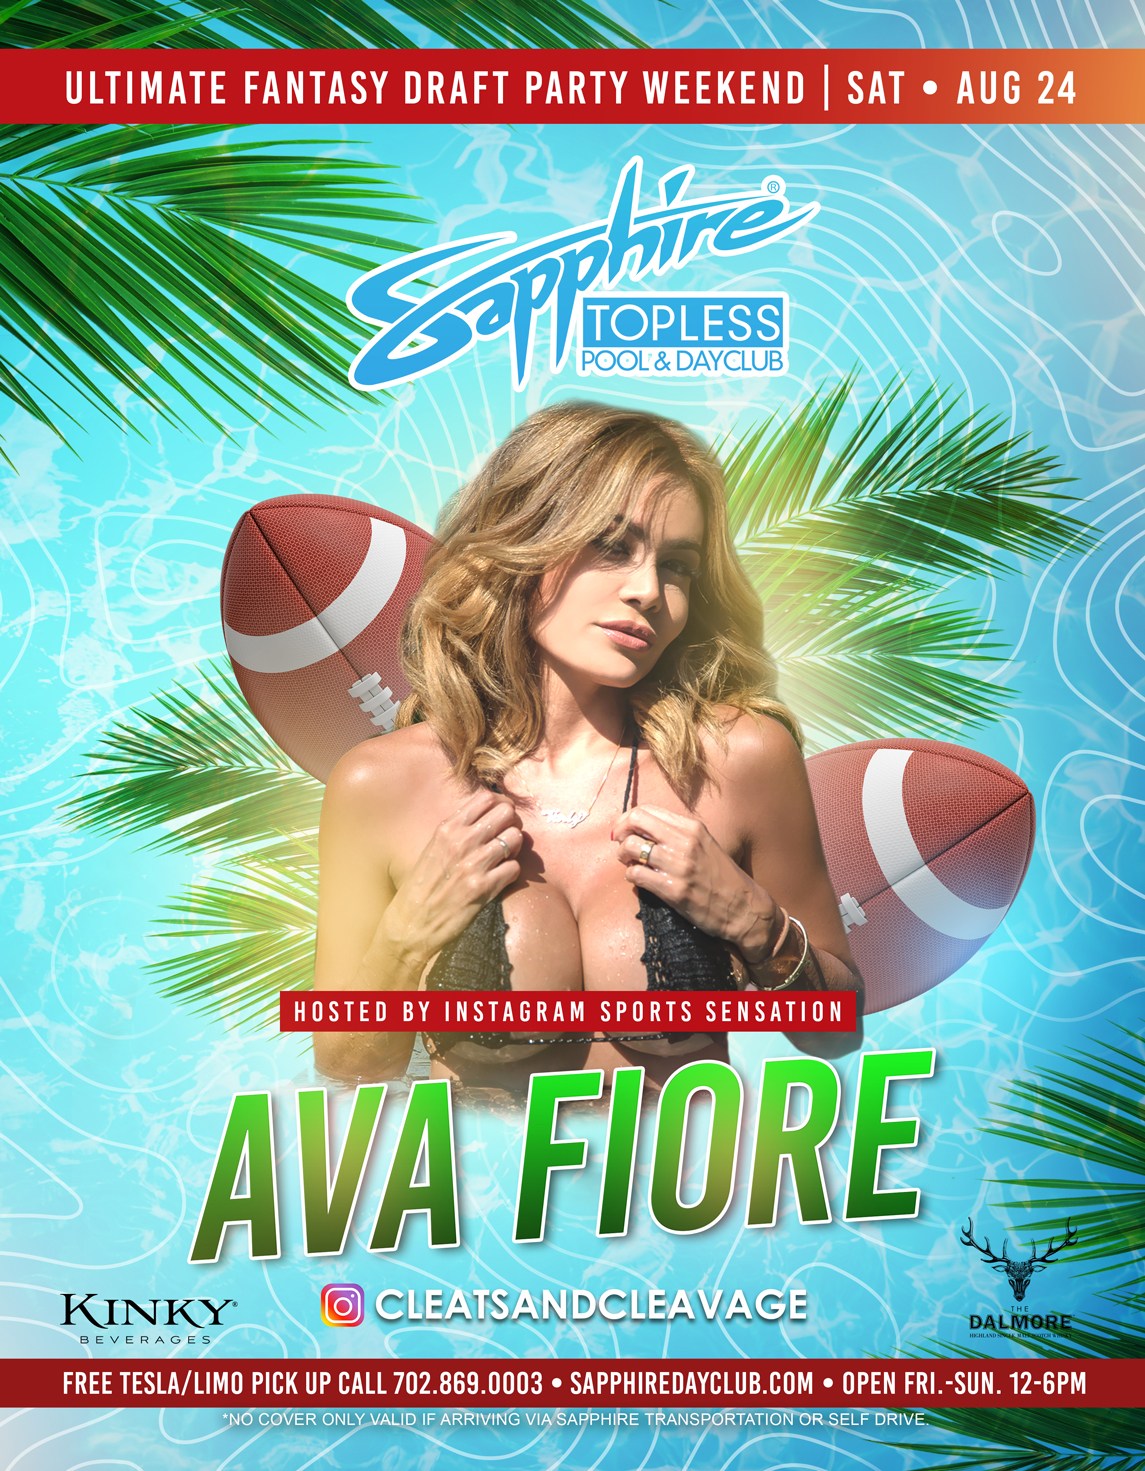 Hosted By Instagram Sports Sensation Ava Fiore